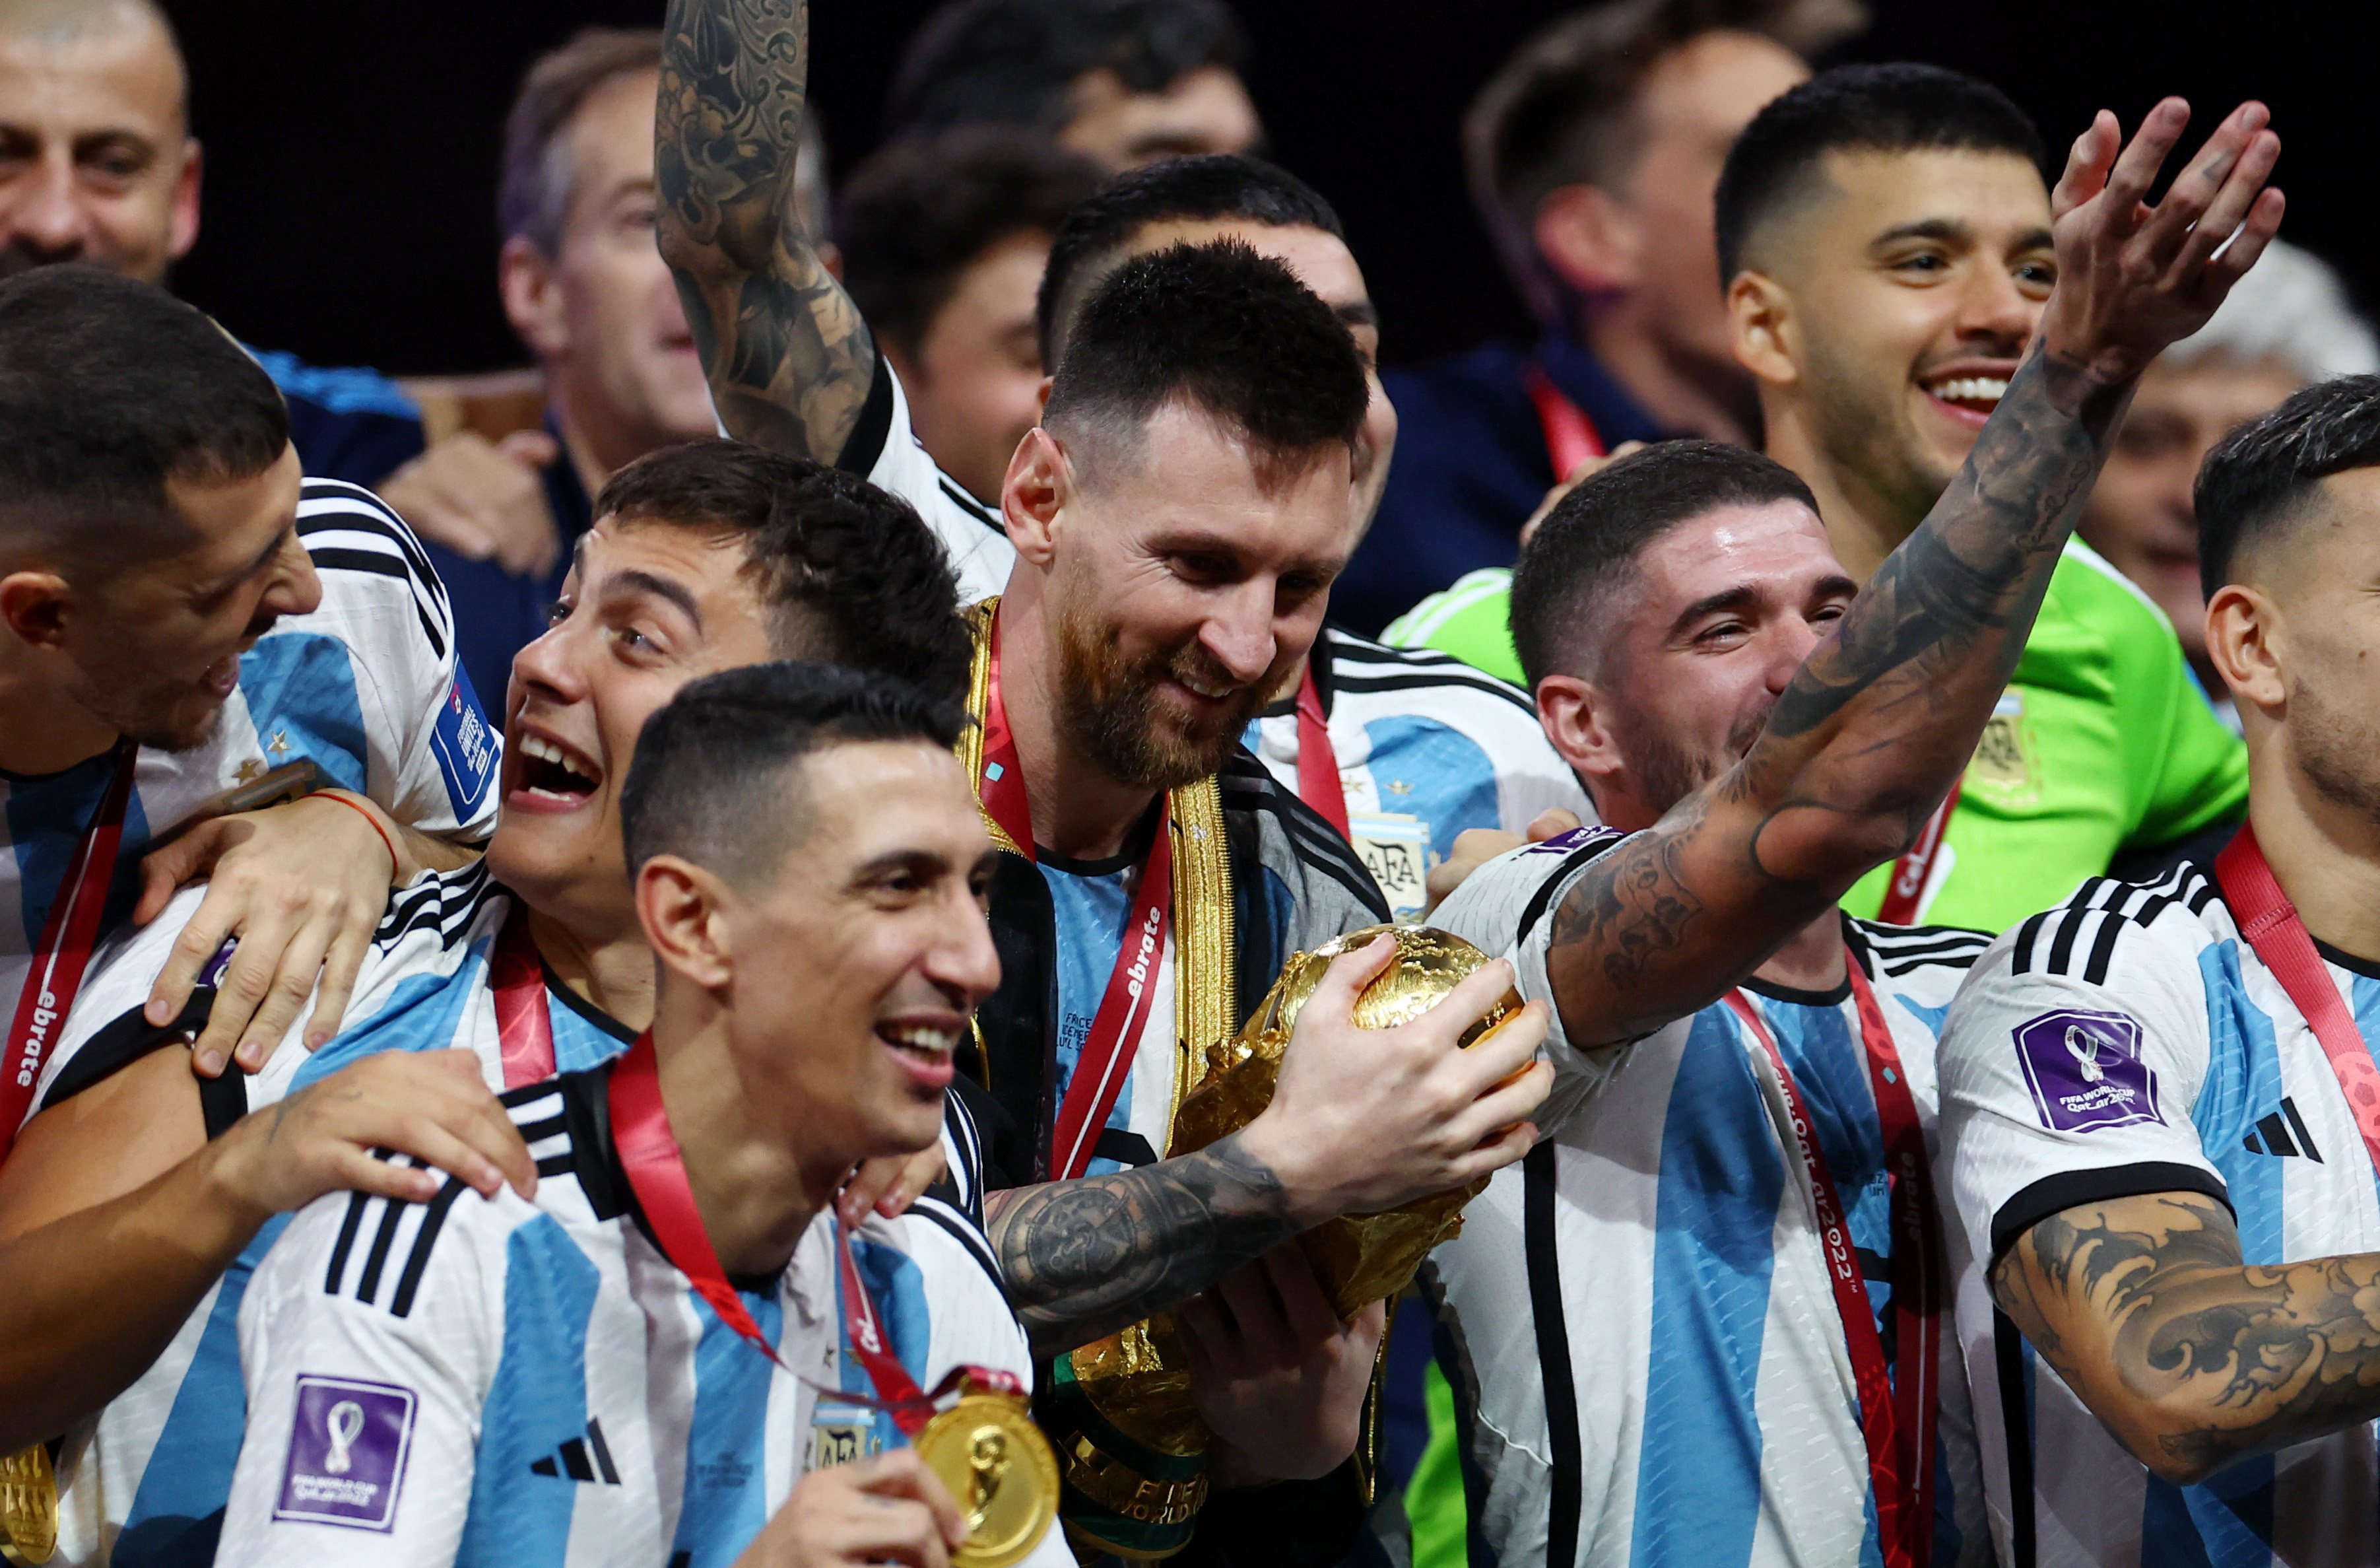 Drama specialists Argentina deserve their World Cup title